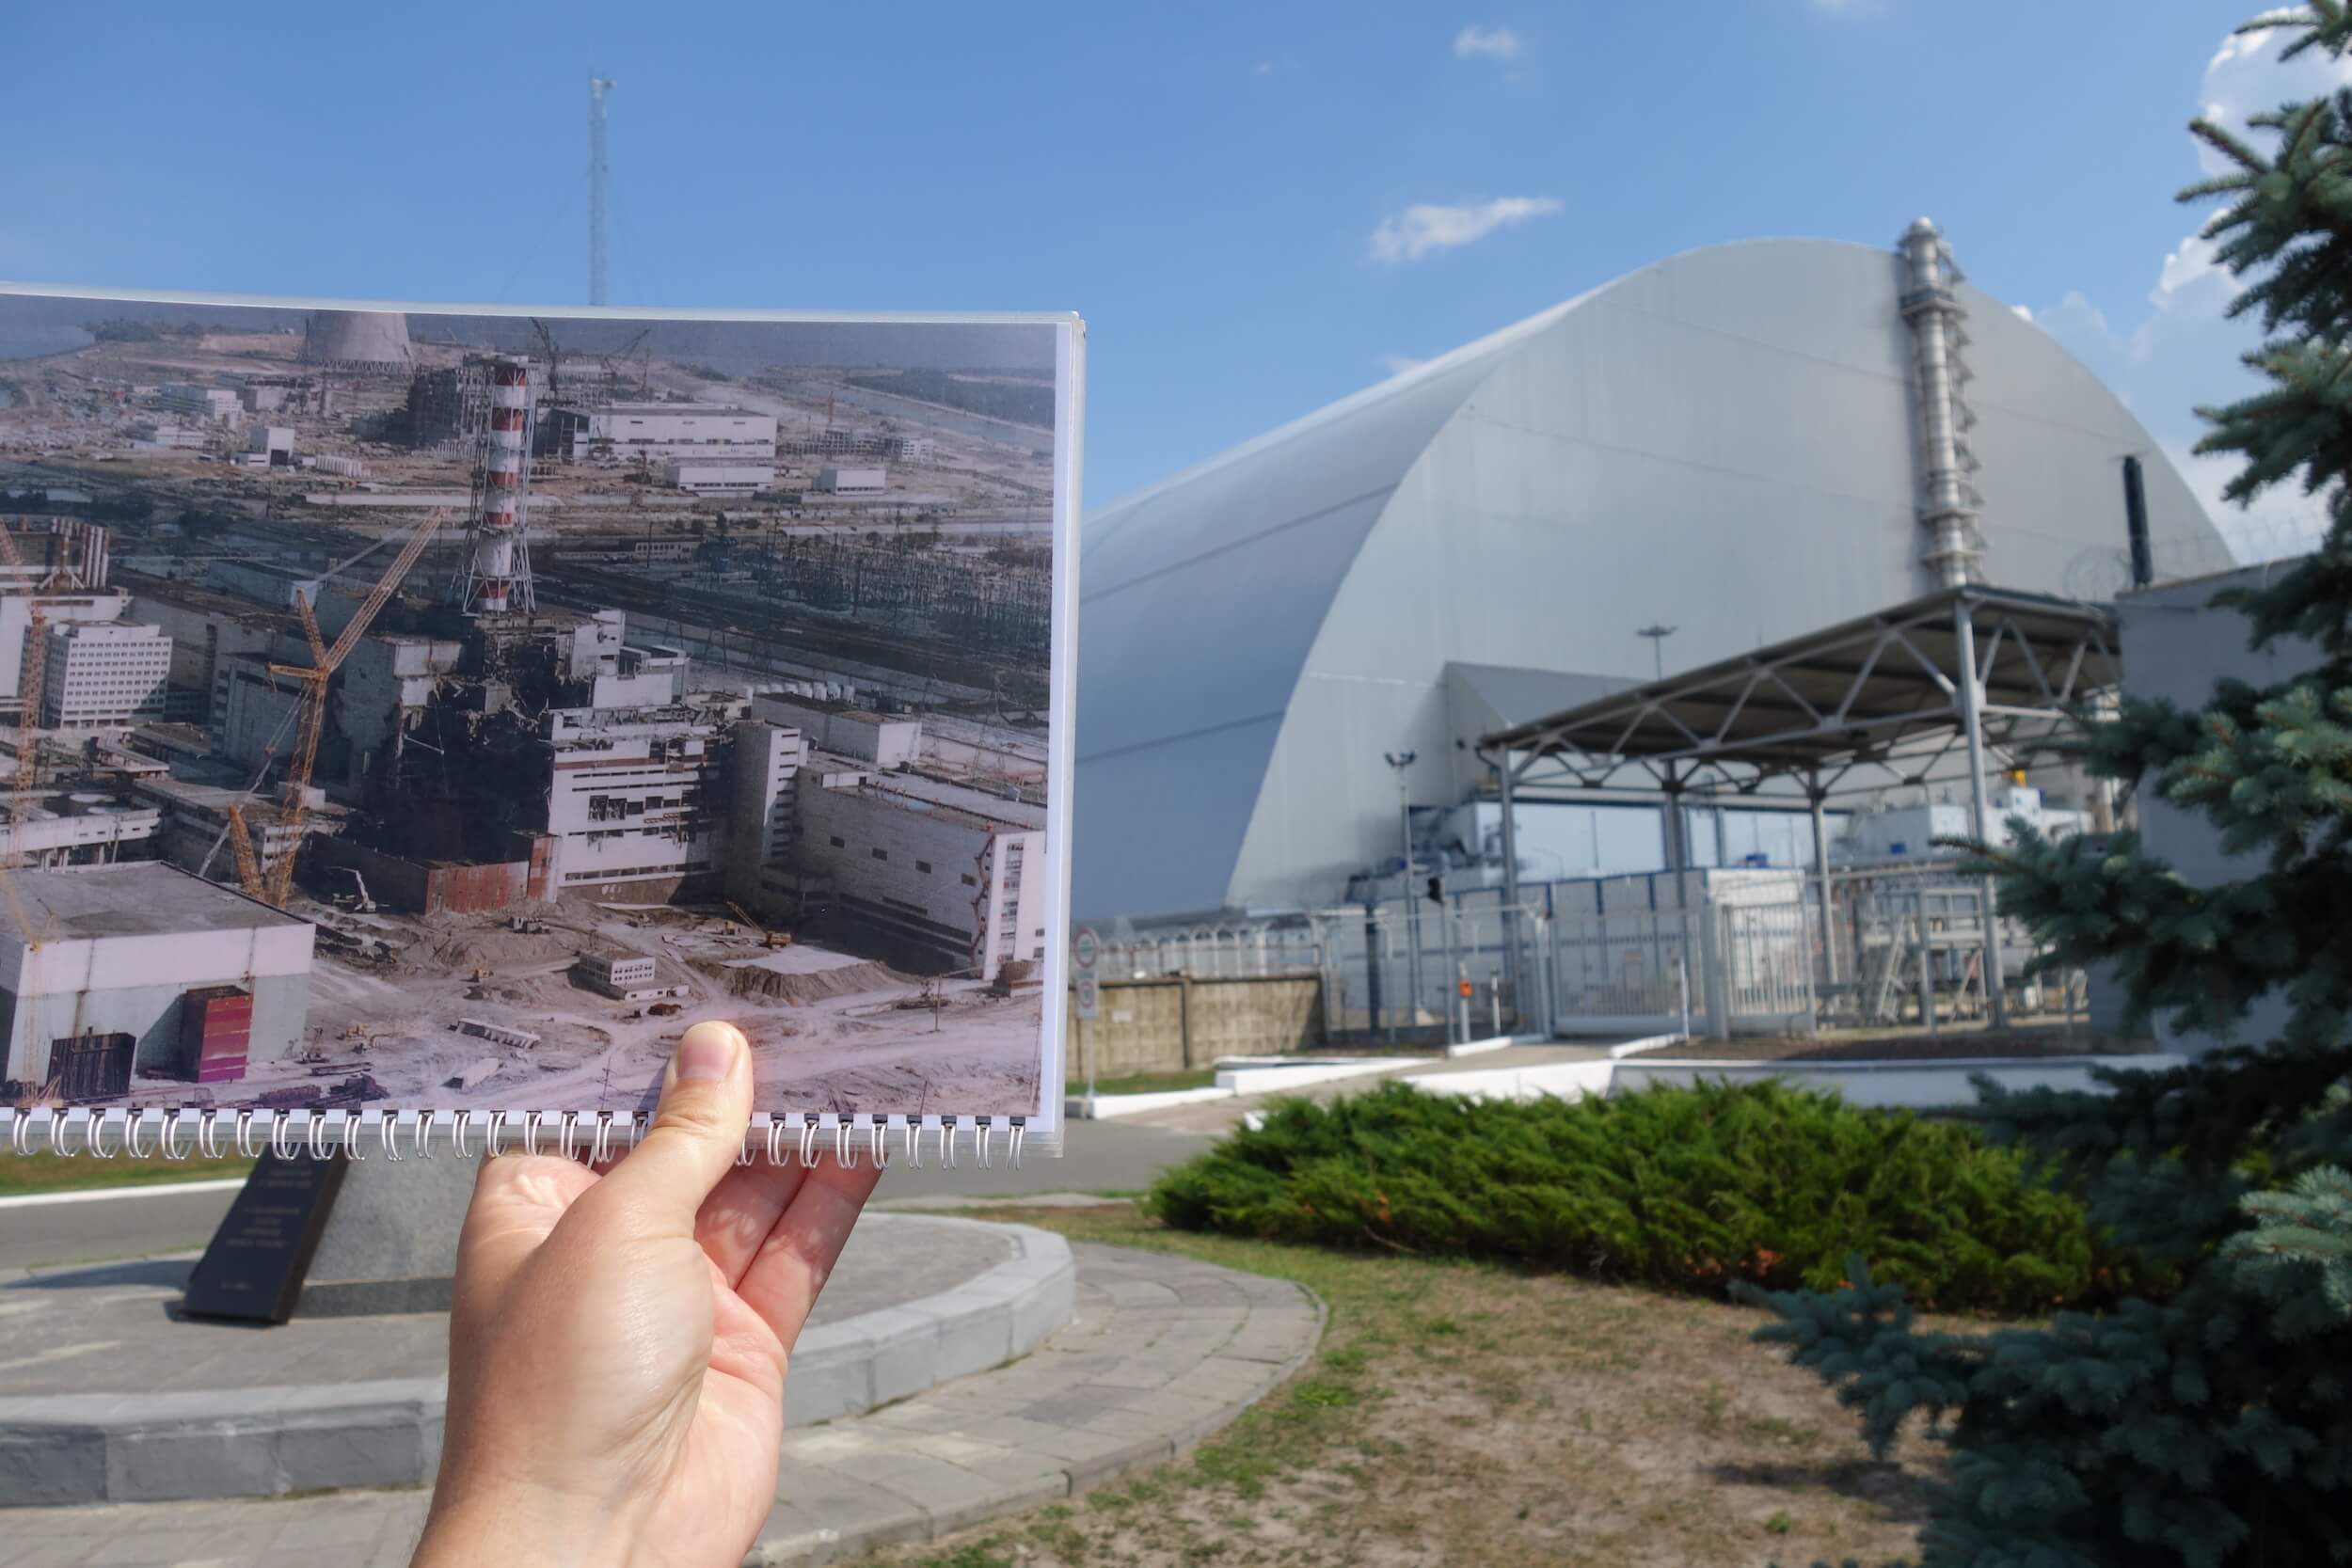 This shot compares a photo on a spiral notebook of Chernobyl Reactor 4 right after the explosion in April 1986 with the current day Reactor 4 which is covered up by a billion dollar sarcophagus.